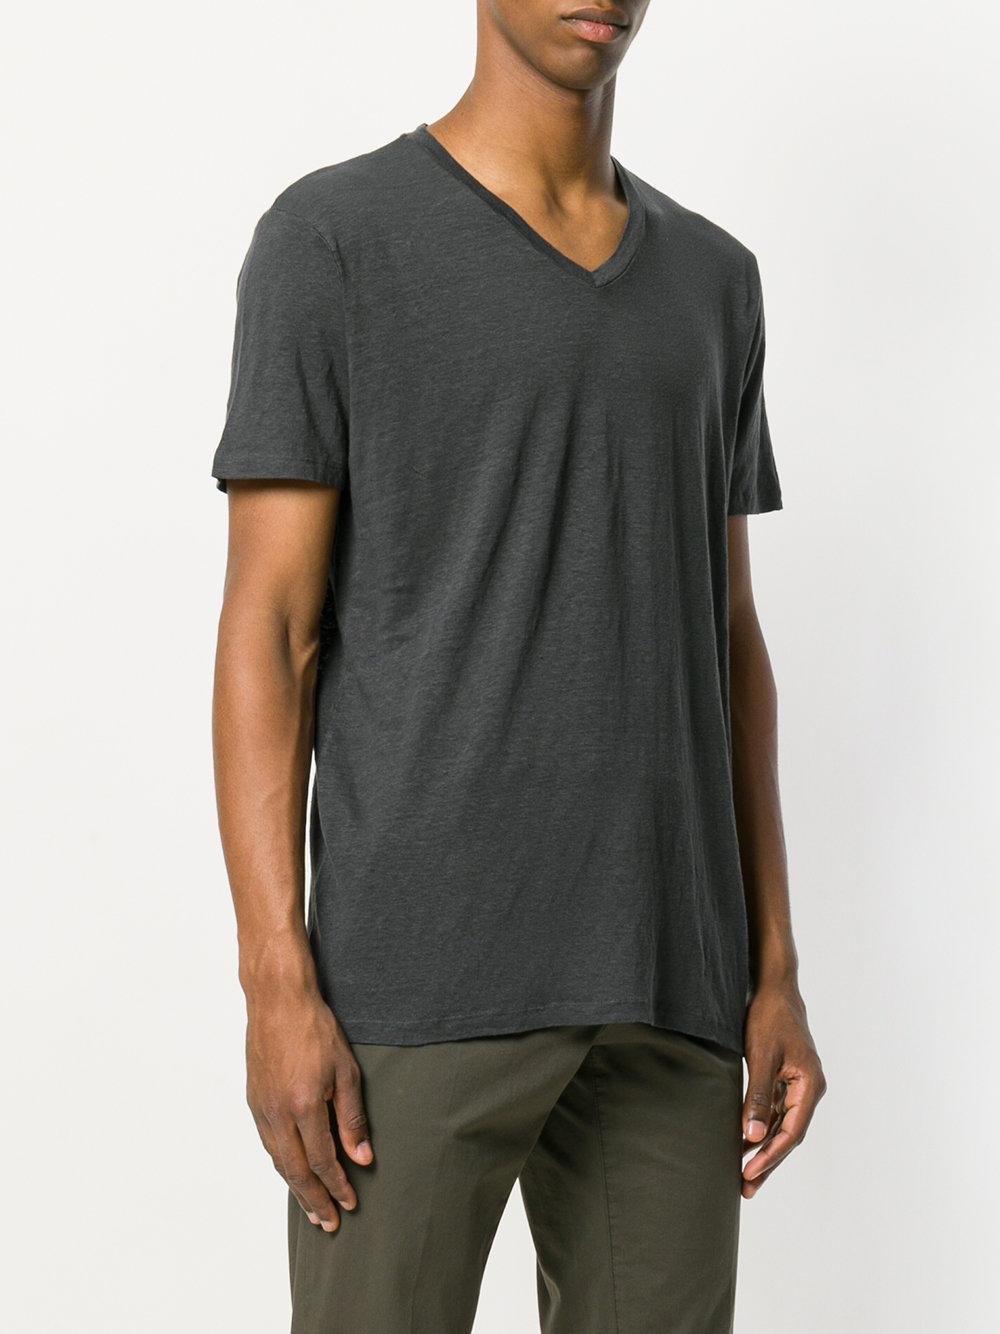 Download Etro V-neck Loose Fit T-shirt in Grey (Gray) for Men - Lyst